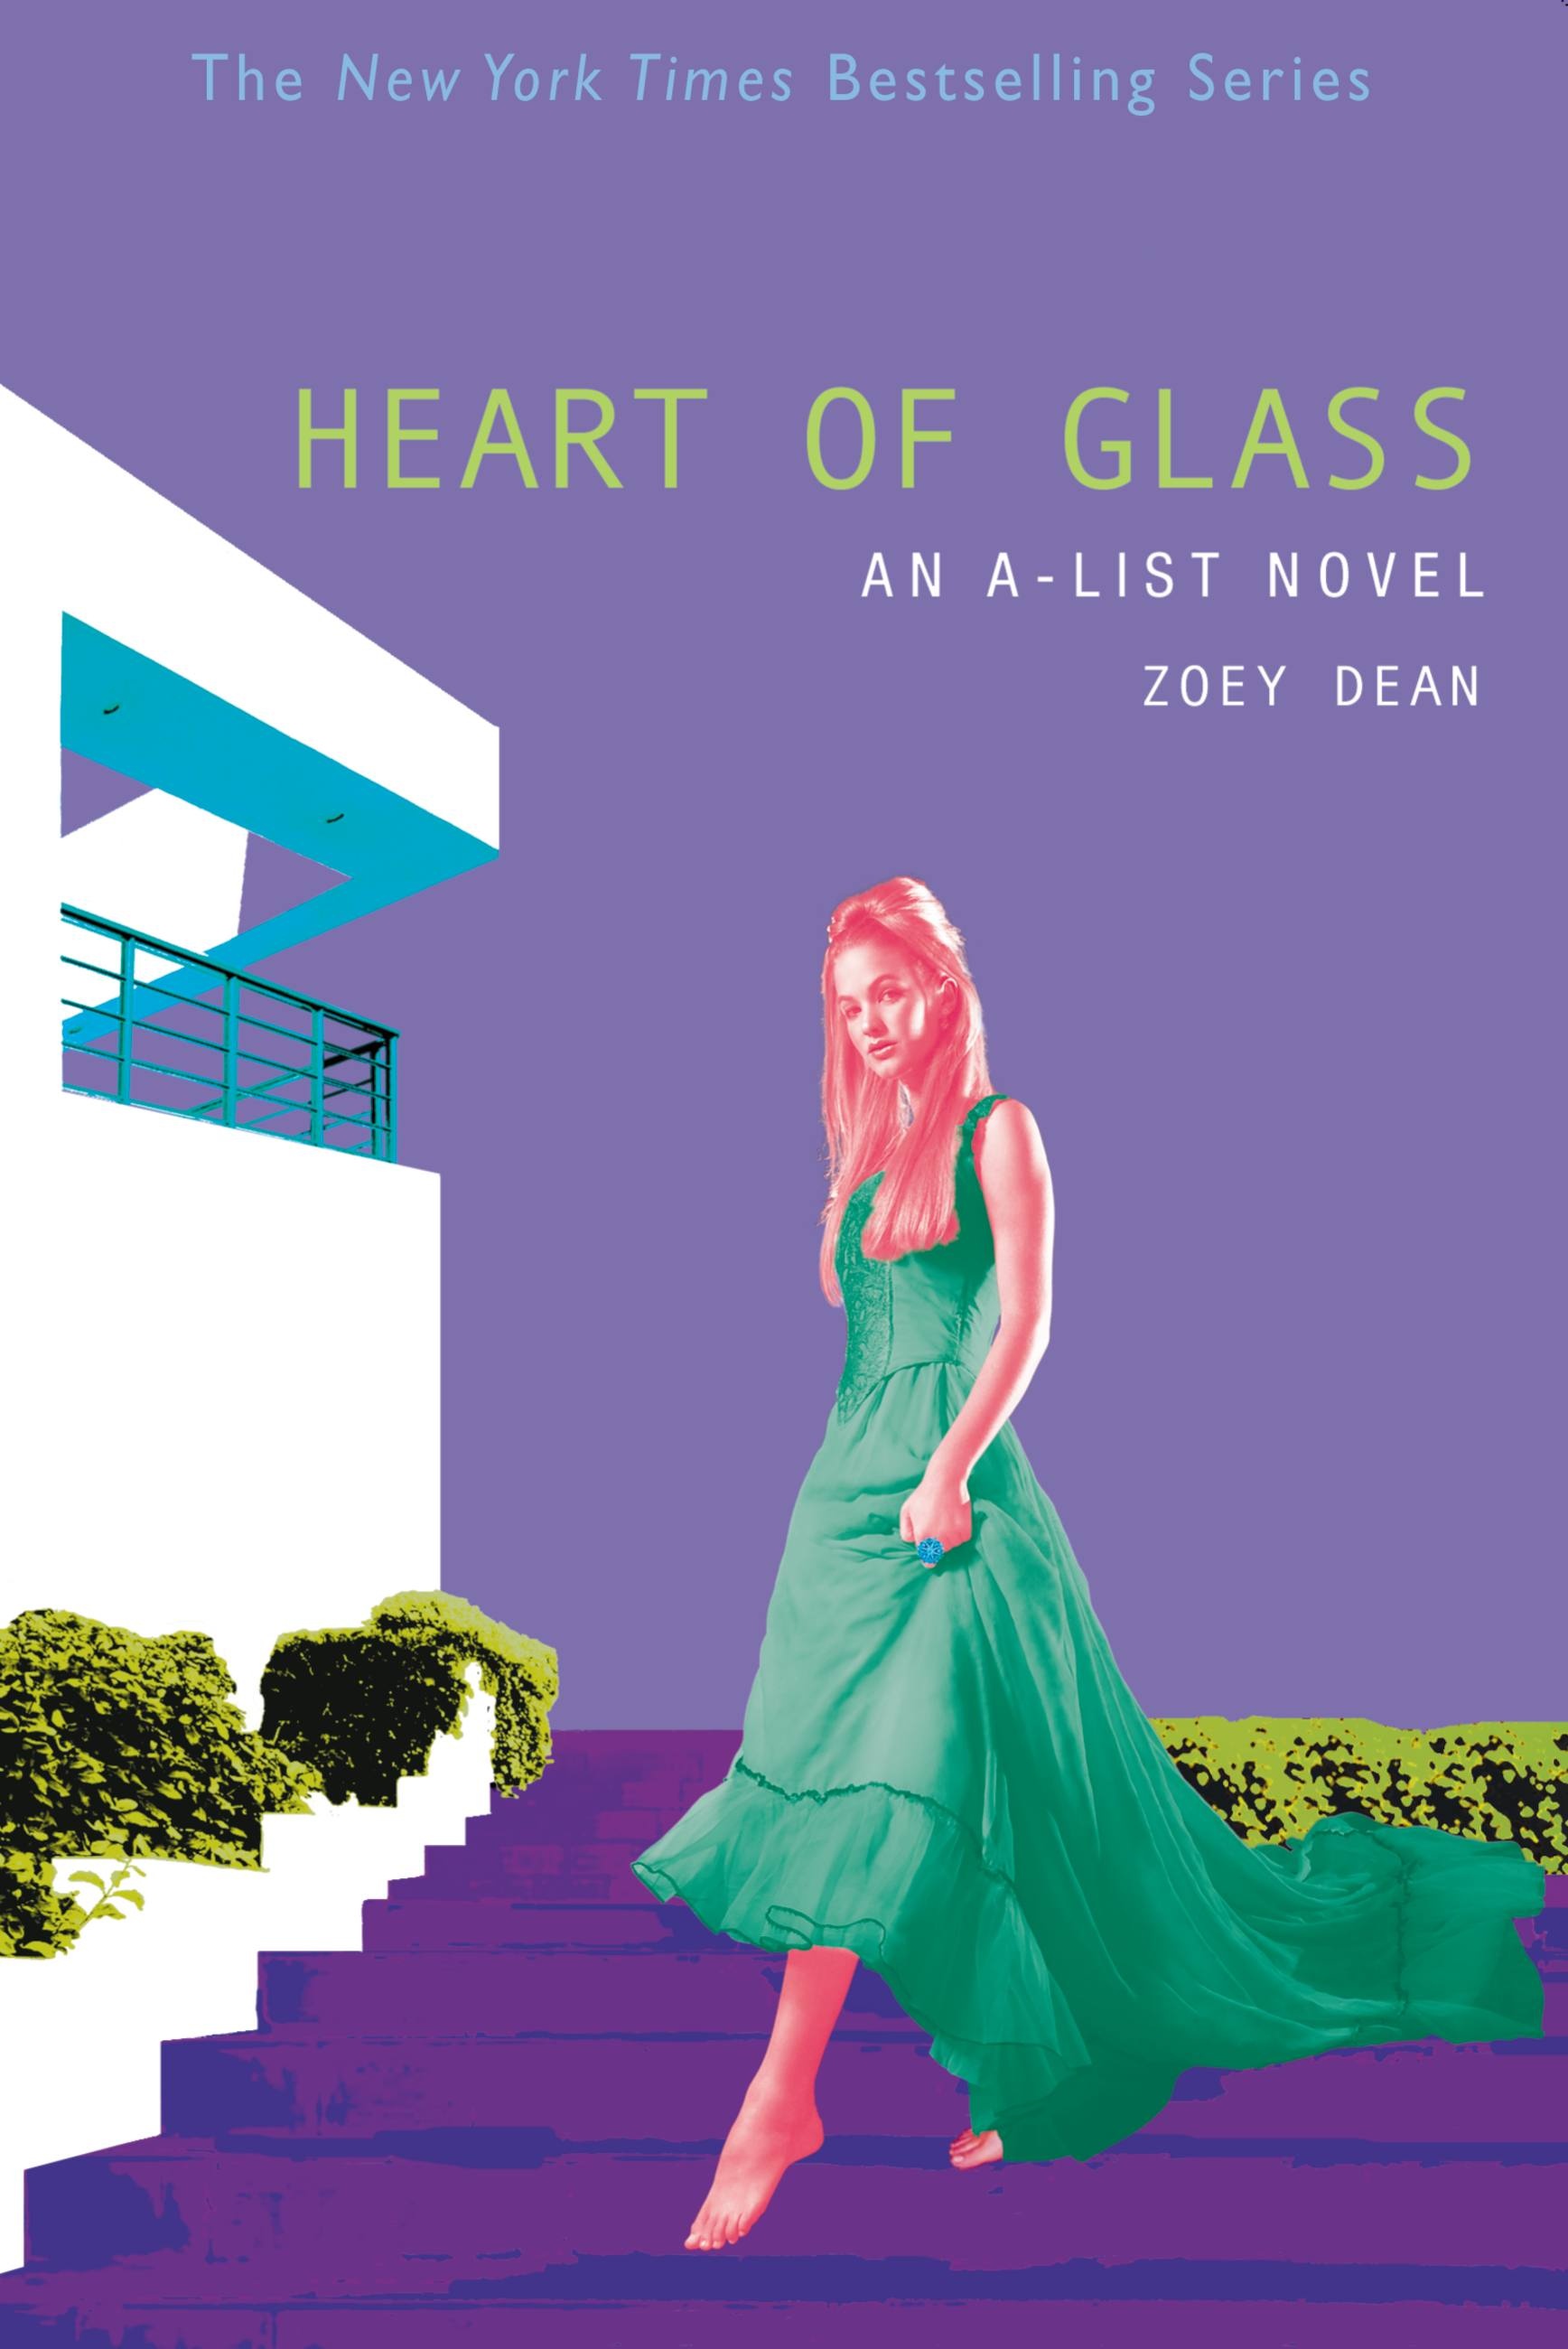 Heart of Glass by Zoey Dean Hachette Book Group